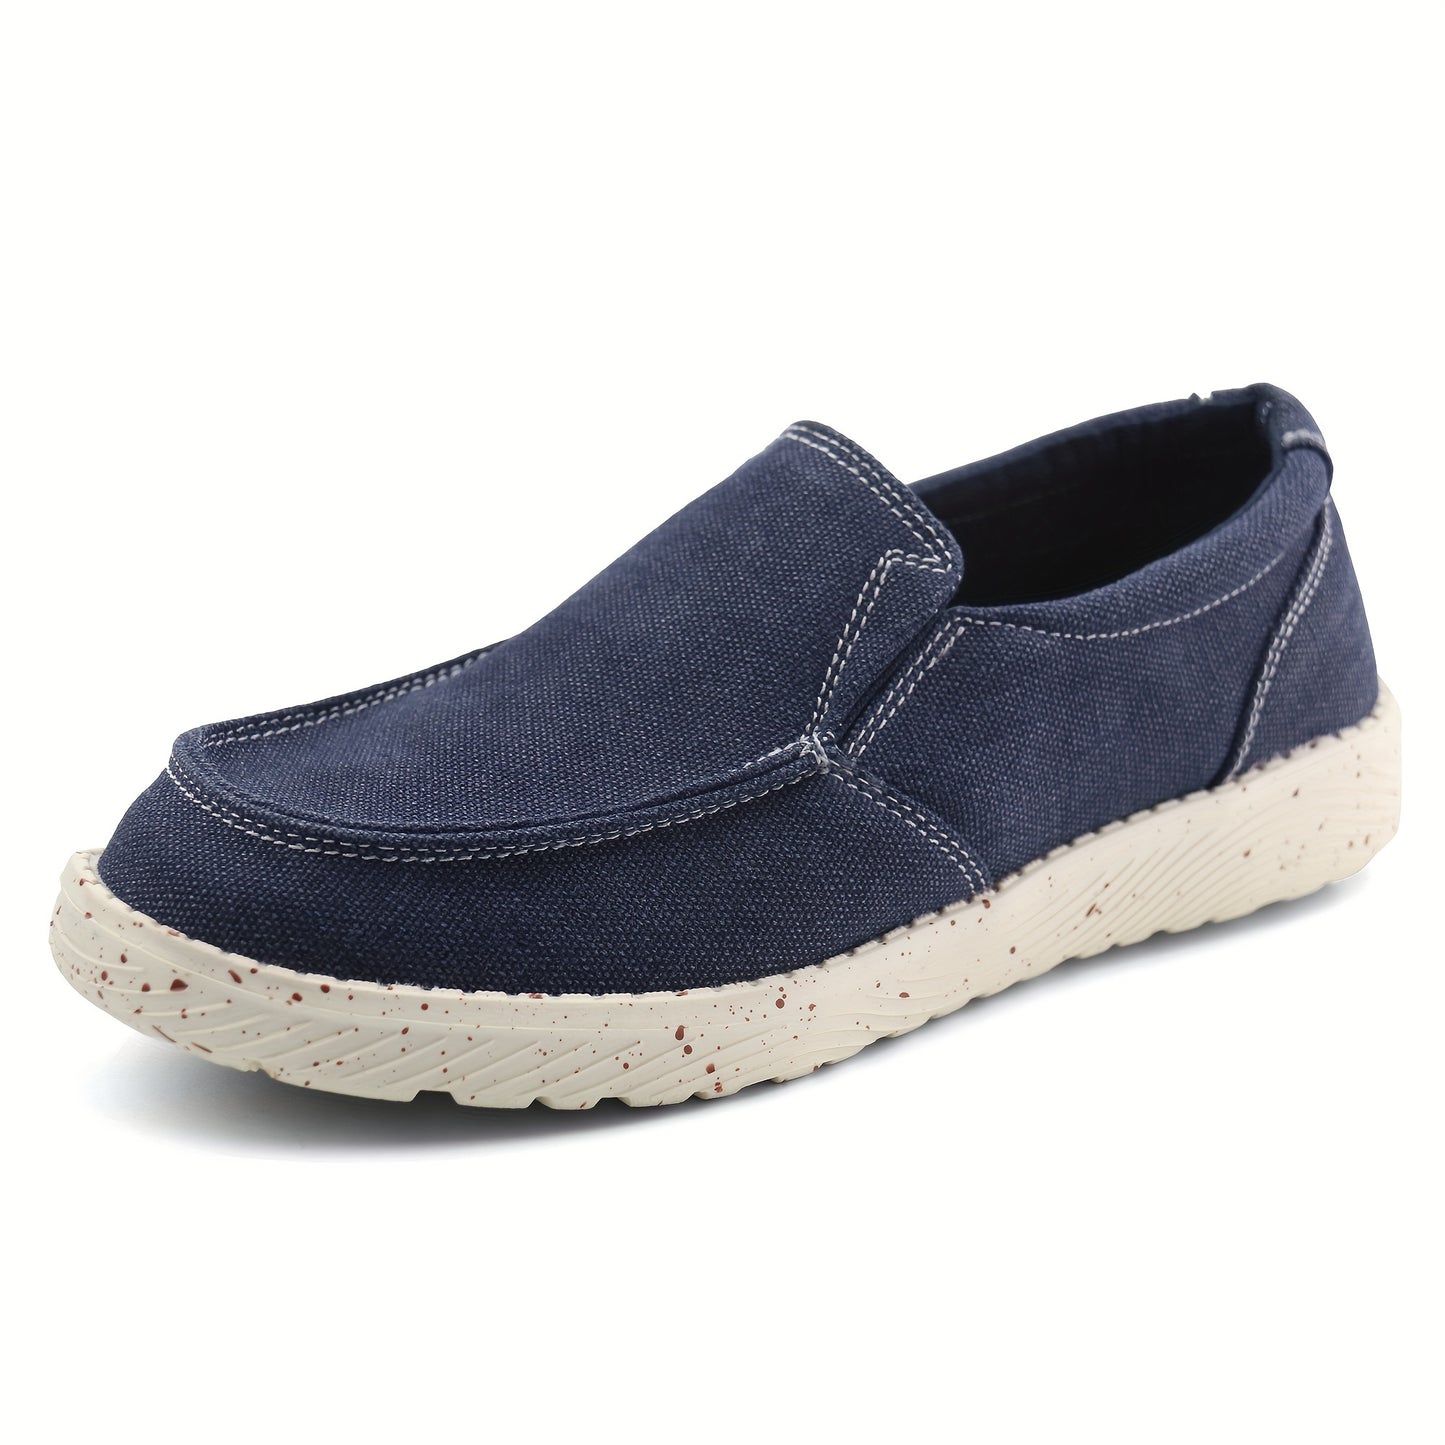 Women's Simple Canvas Shoes, Casual Slip On Outdoor Shoes, Women's Comfortable Low Top Shoes